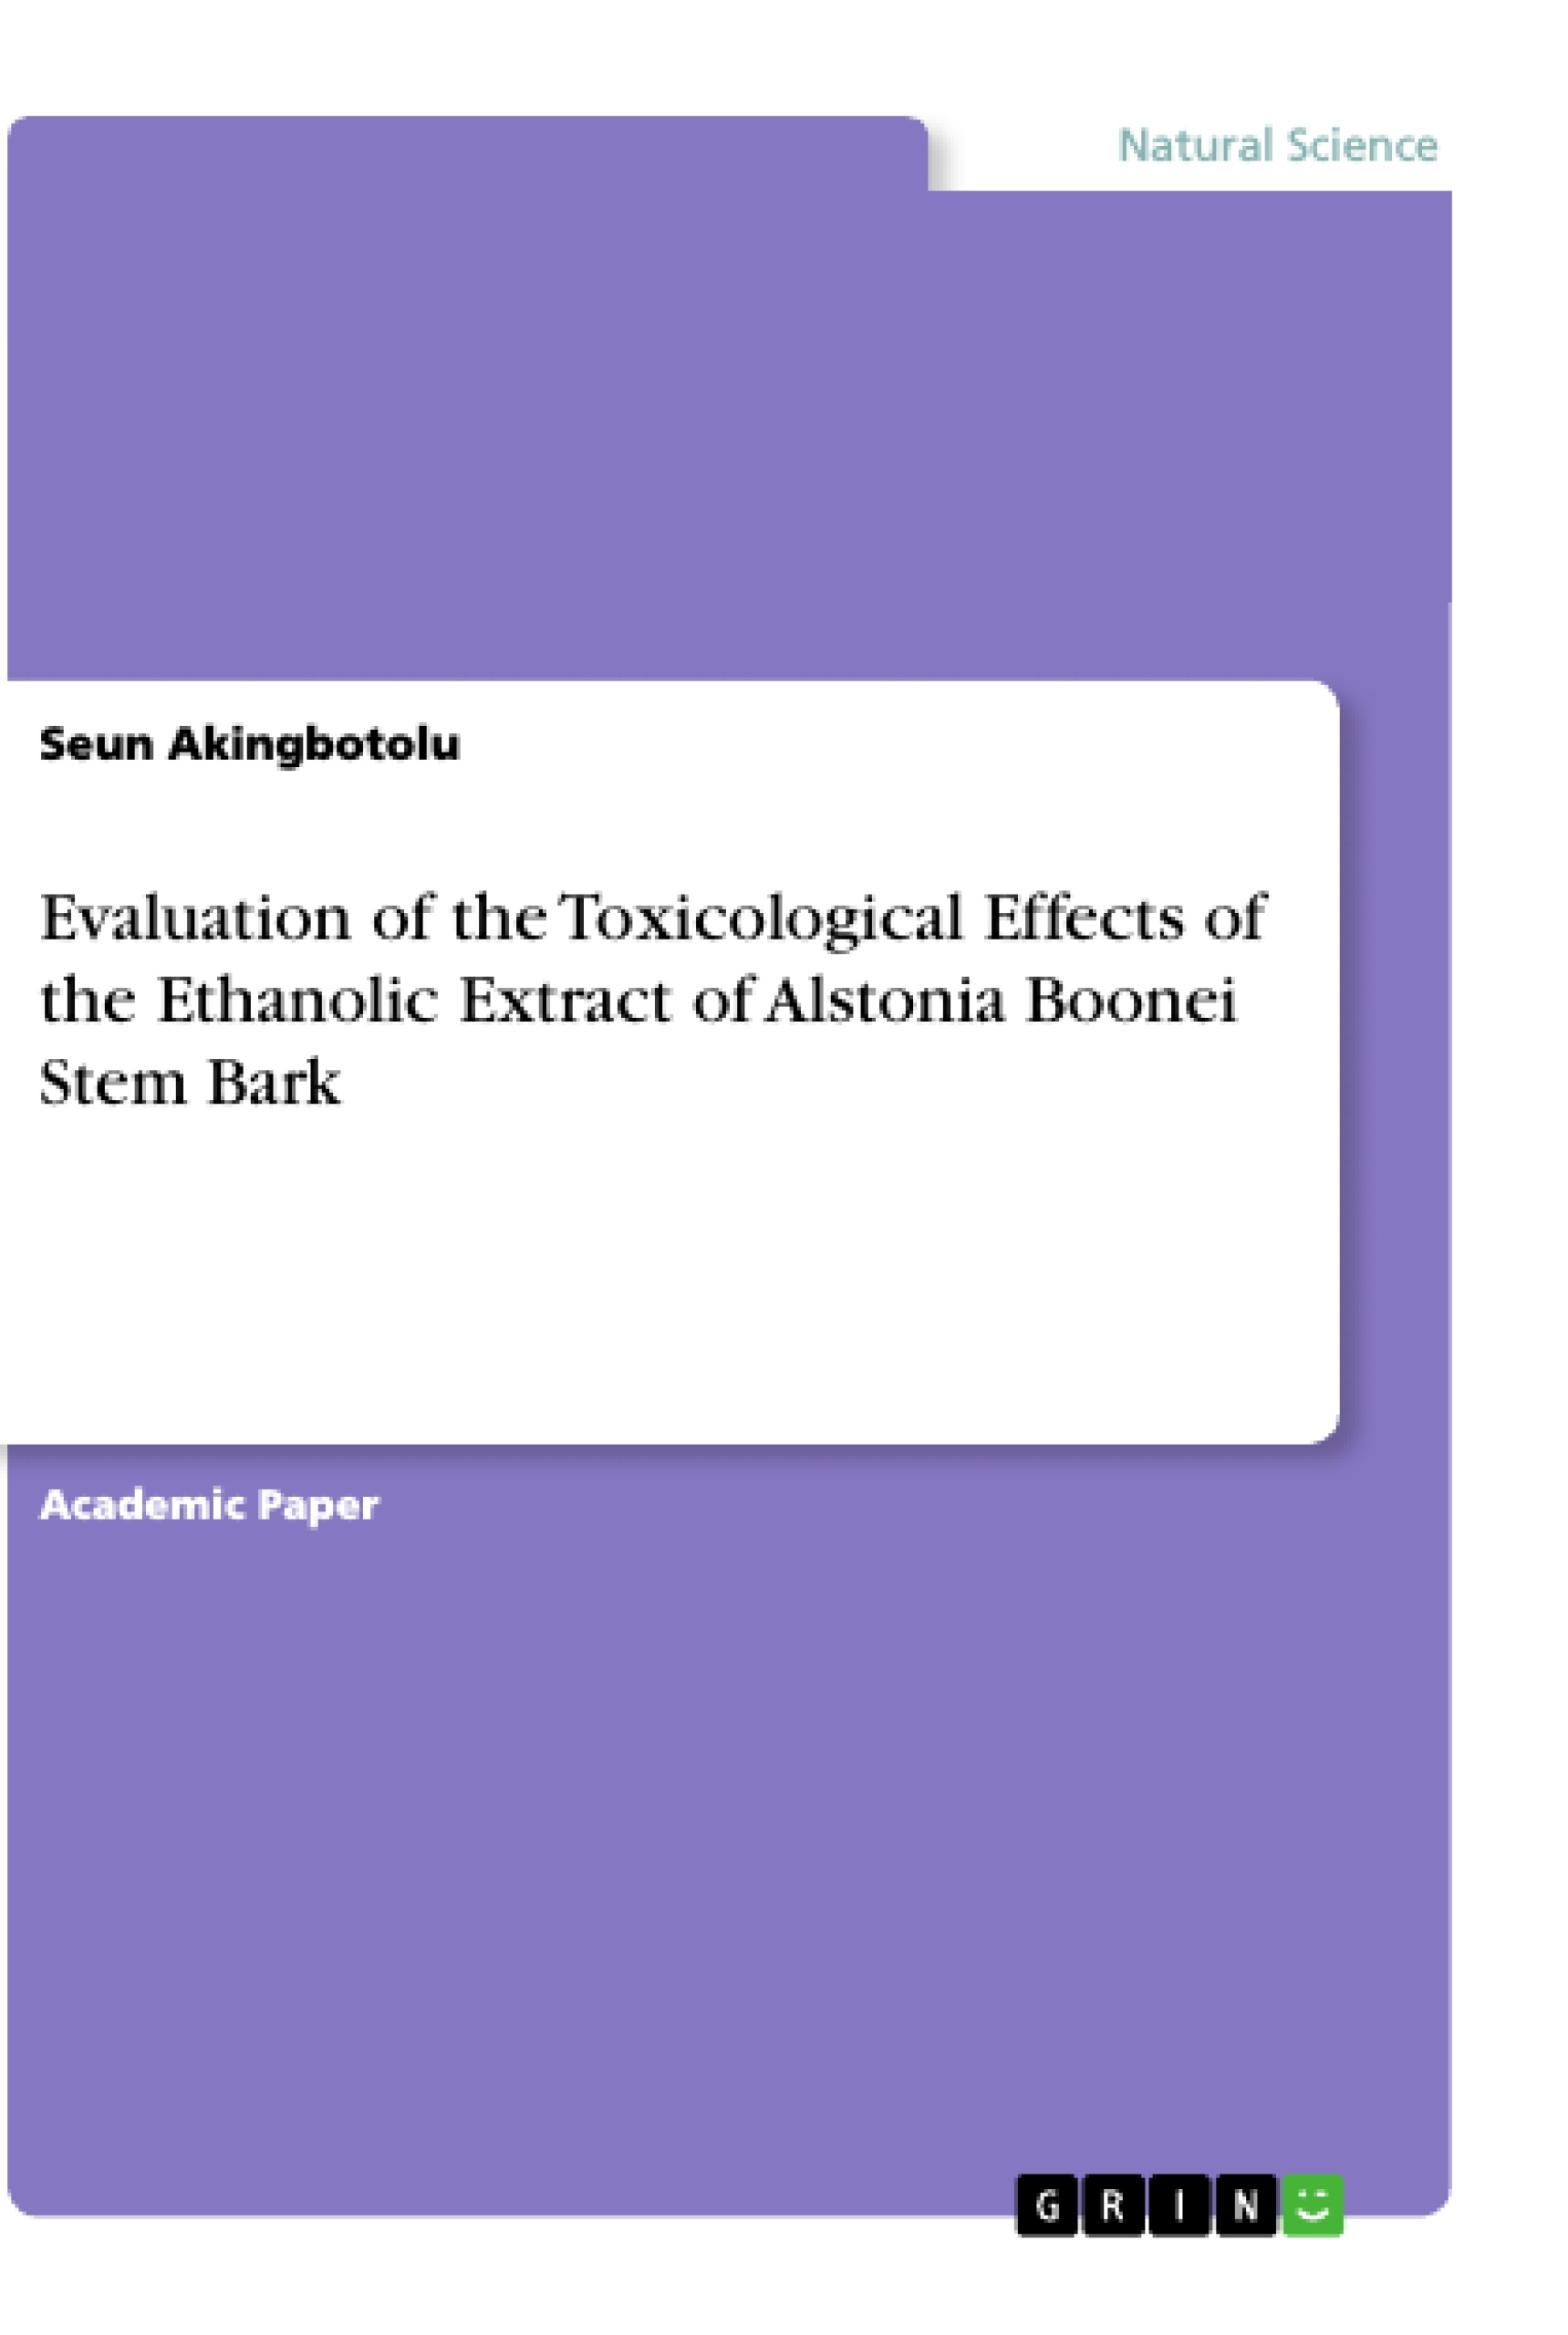 Titre: Evaluation of the Toxicological Effects of the Ethanolic Extract of Alstonia Boonei Stem Bark